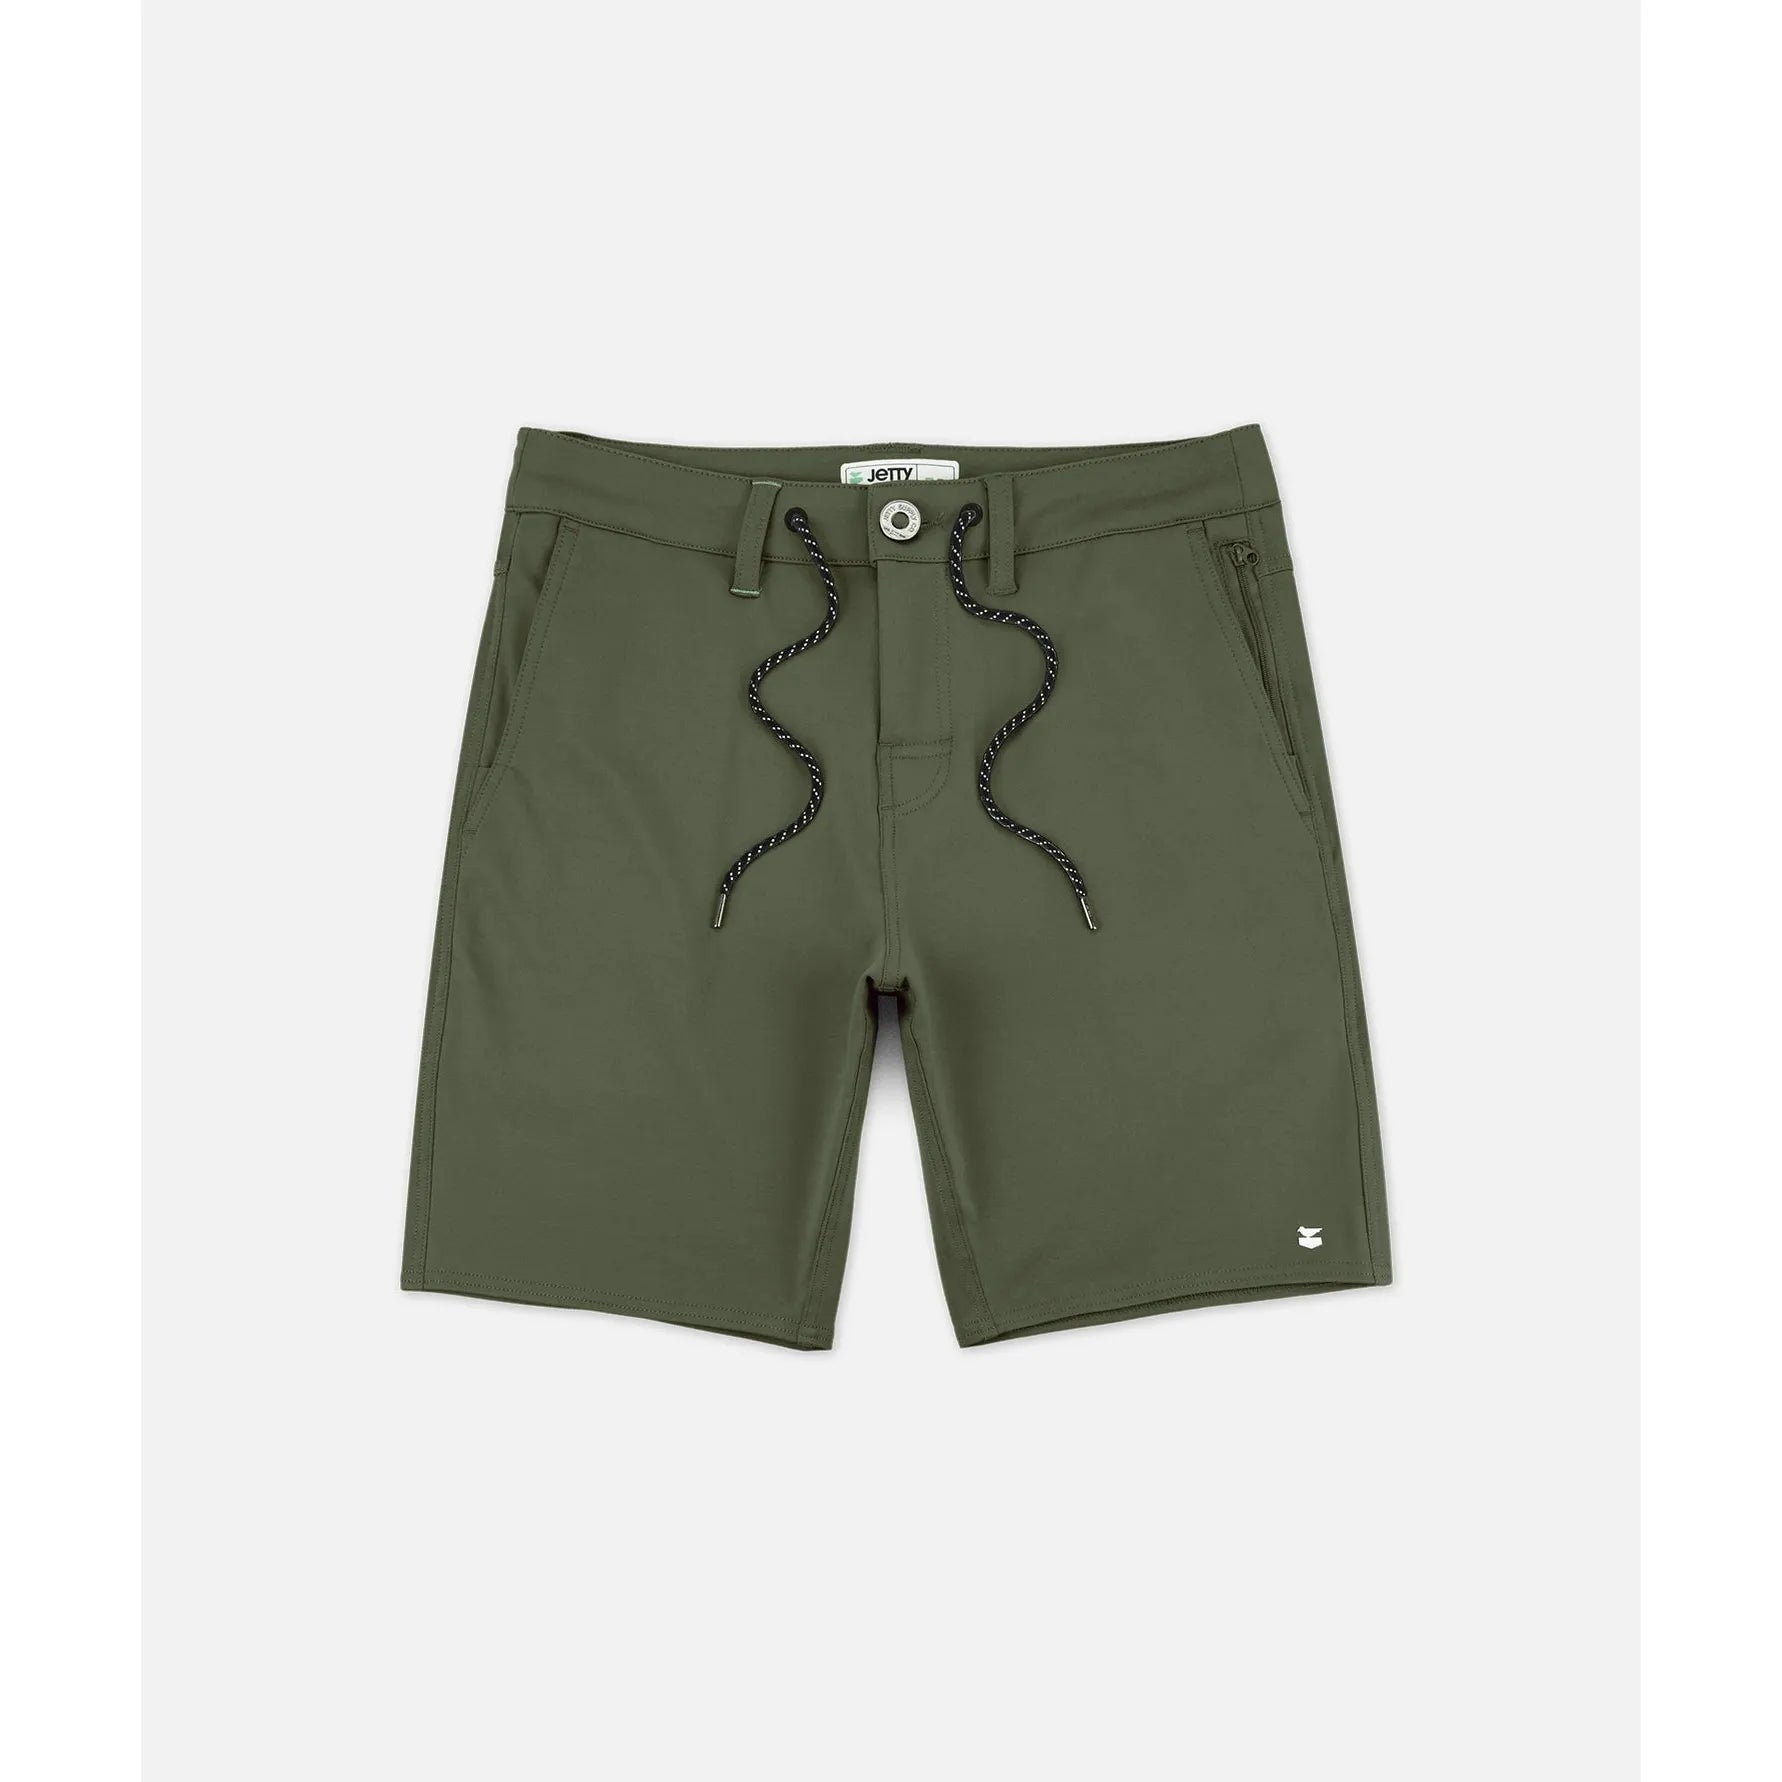 Jetty Traverse Utility Shorts Military Green - FULLSEND SKI AND OUTDOOR